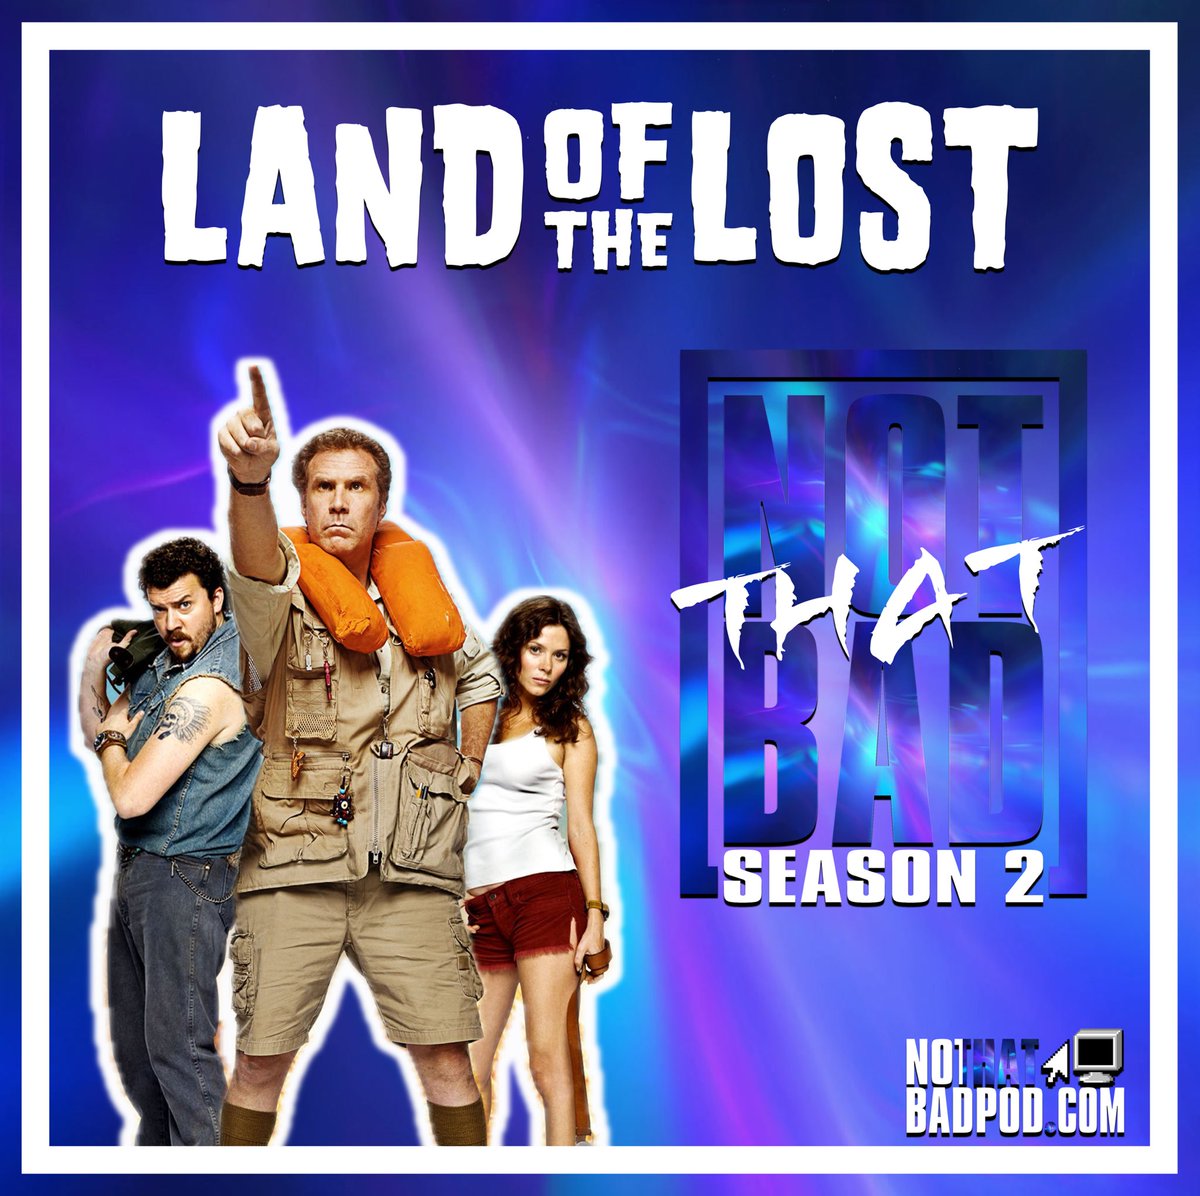 While we work on retrieving the YouTube version from the belly of a dinosaur, please enjoy the audio version of our latest episode, covering the 2009 comedy film Land of the Lost!

open.spotify.com/episode/6g7J4C…

podcasts.apple.com/us/podcast/not…

#willferrell #LandOfTheLost #notthatbad #comedy